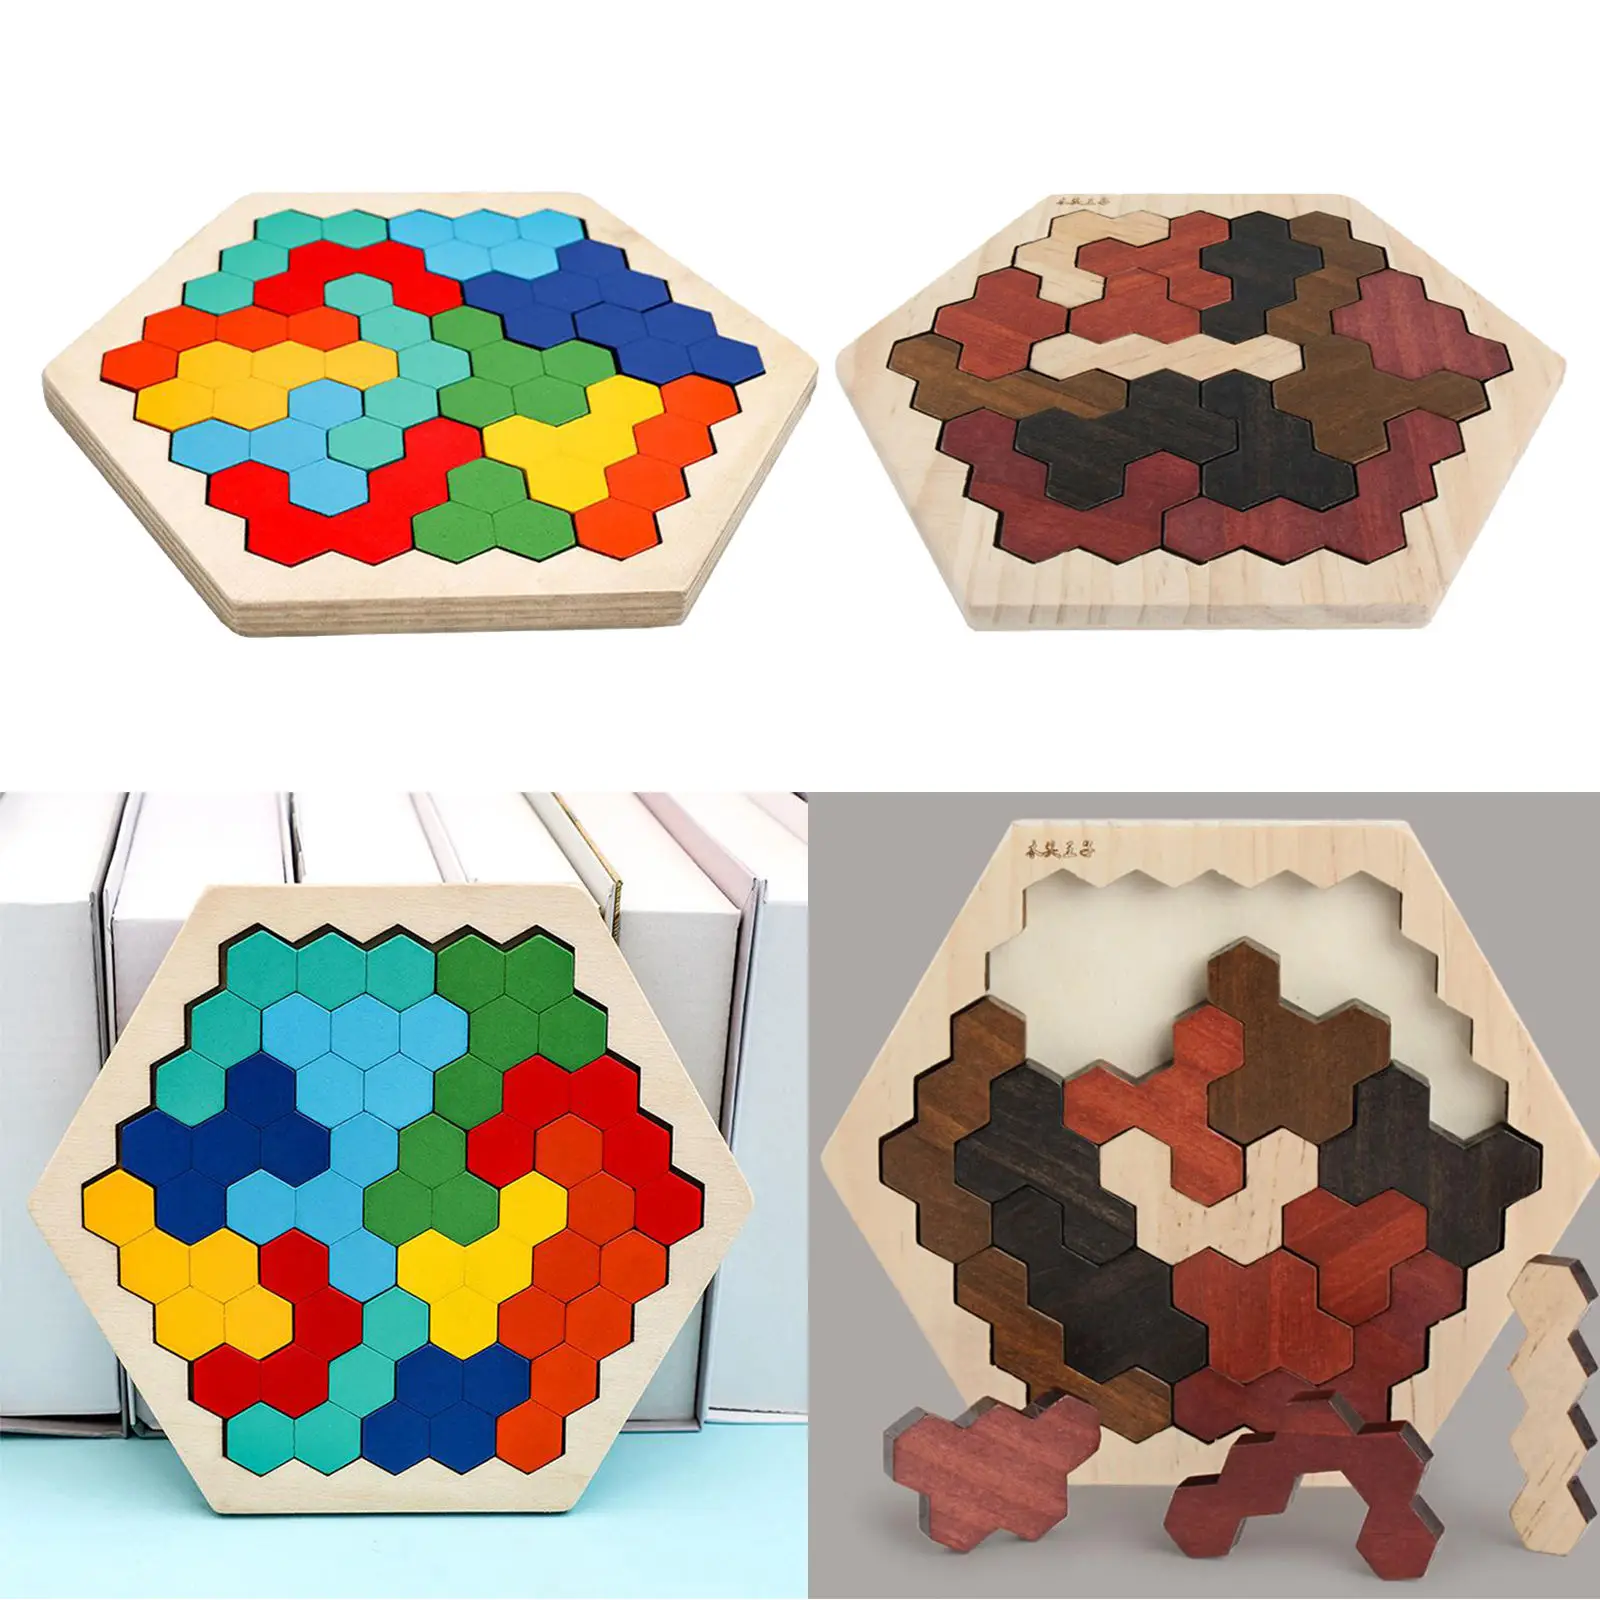 Wood Hexagon Tangram Puzzle Classic Handmade 3D Challenging Puzzles Brain Teasers Games Portable Play Educational Toys Gift